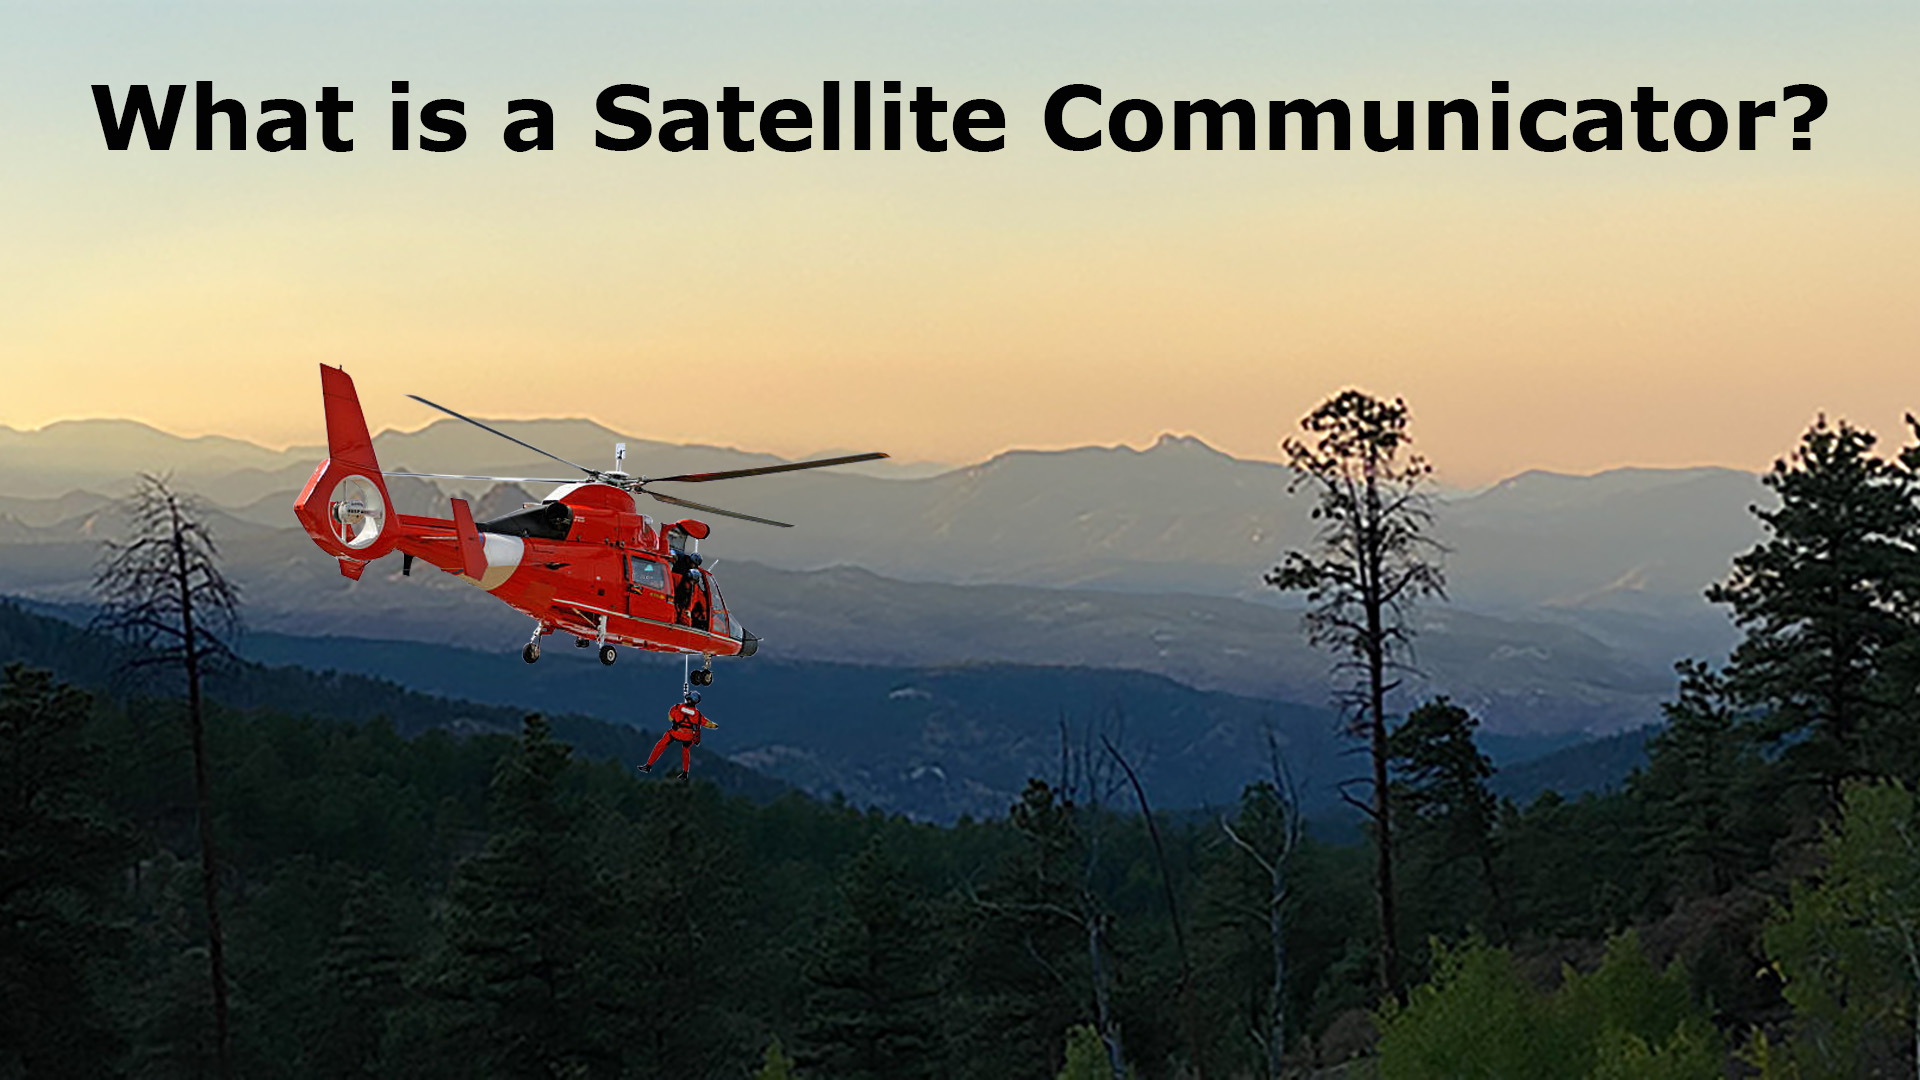 What is a Satellite Communicator?